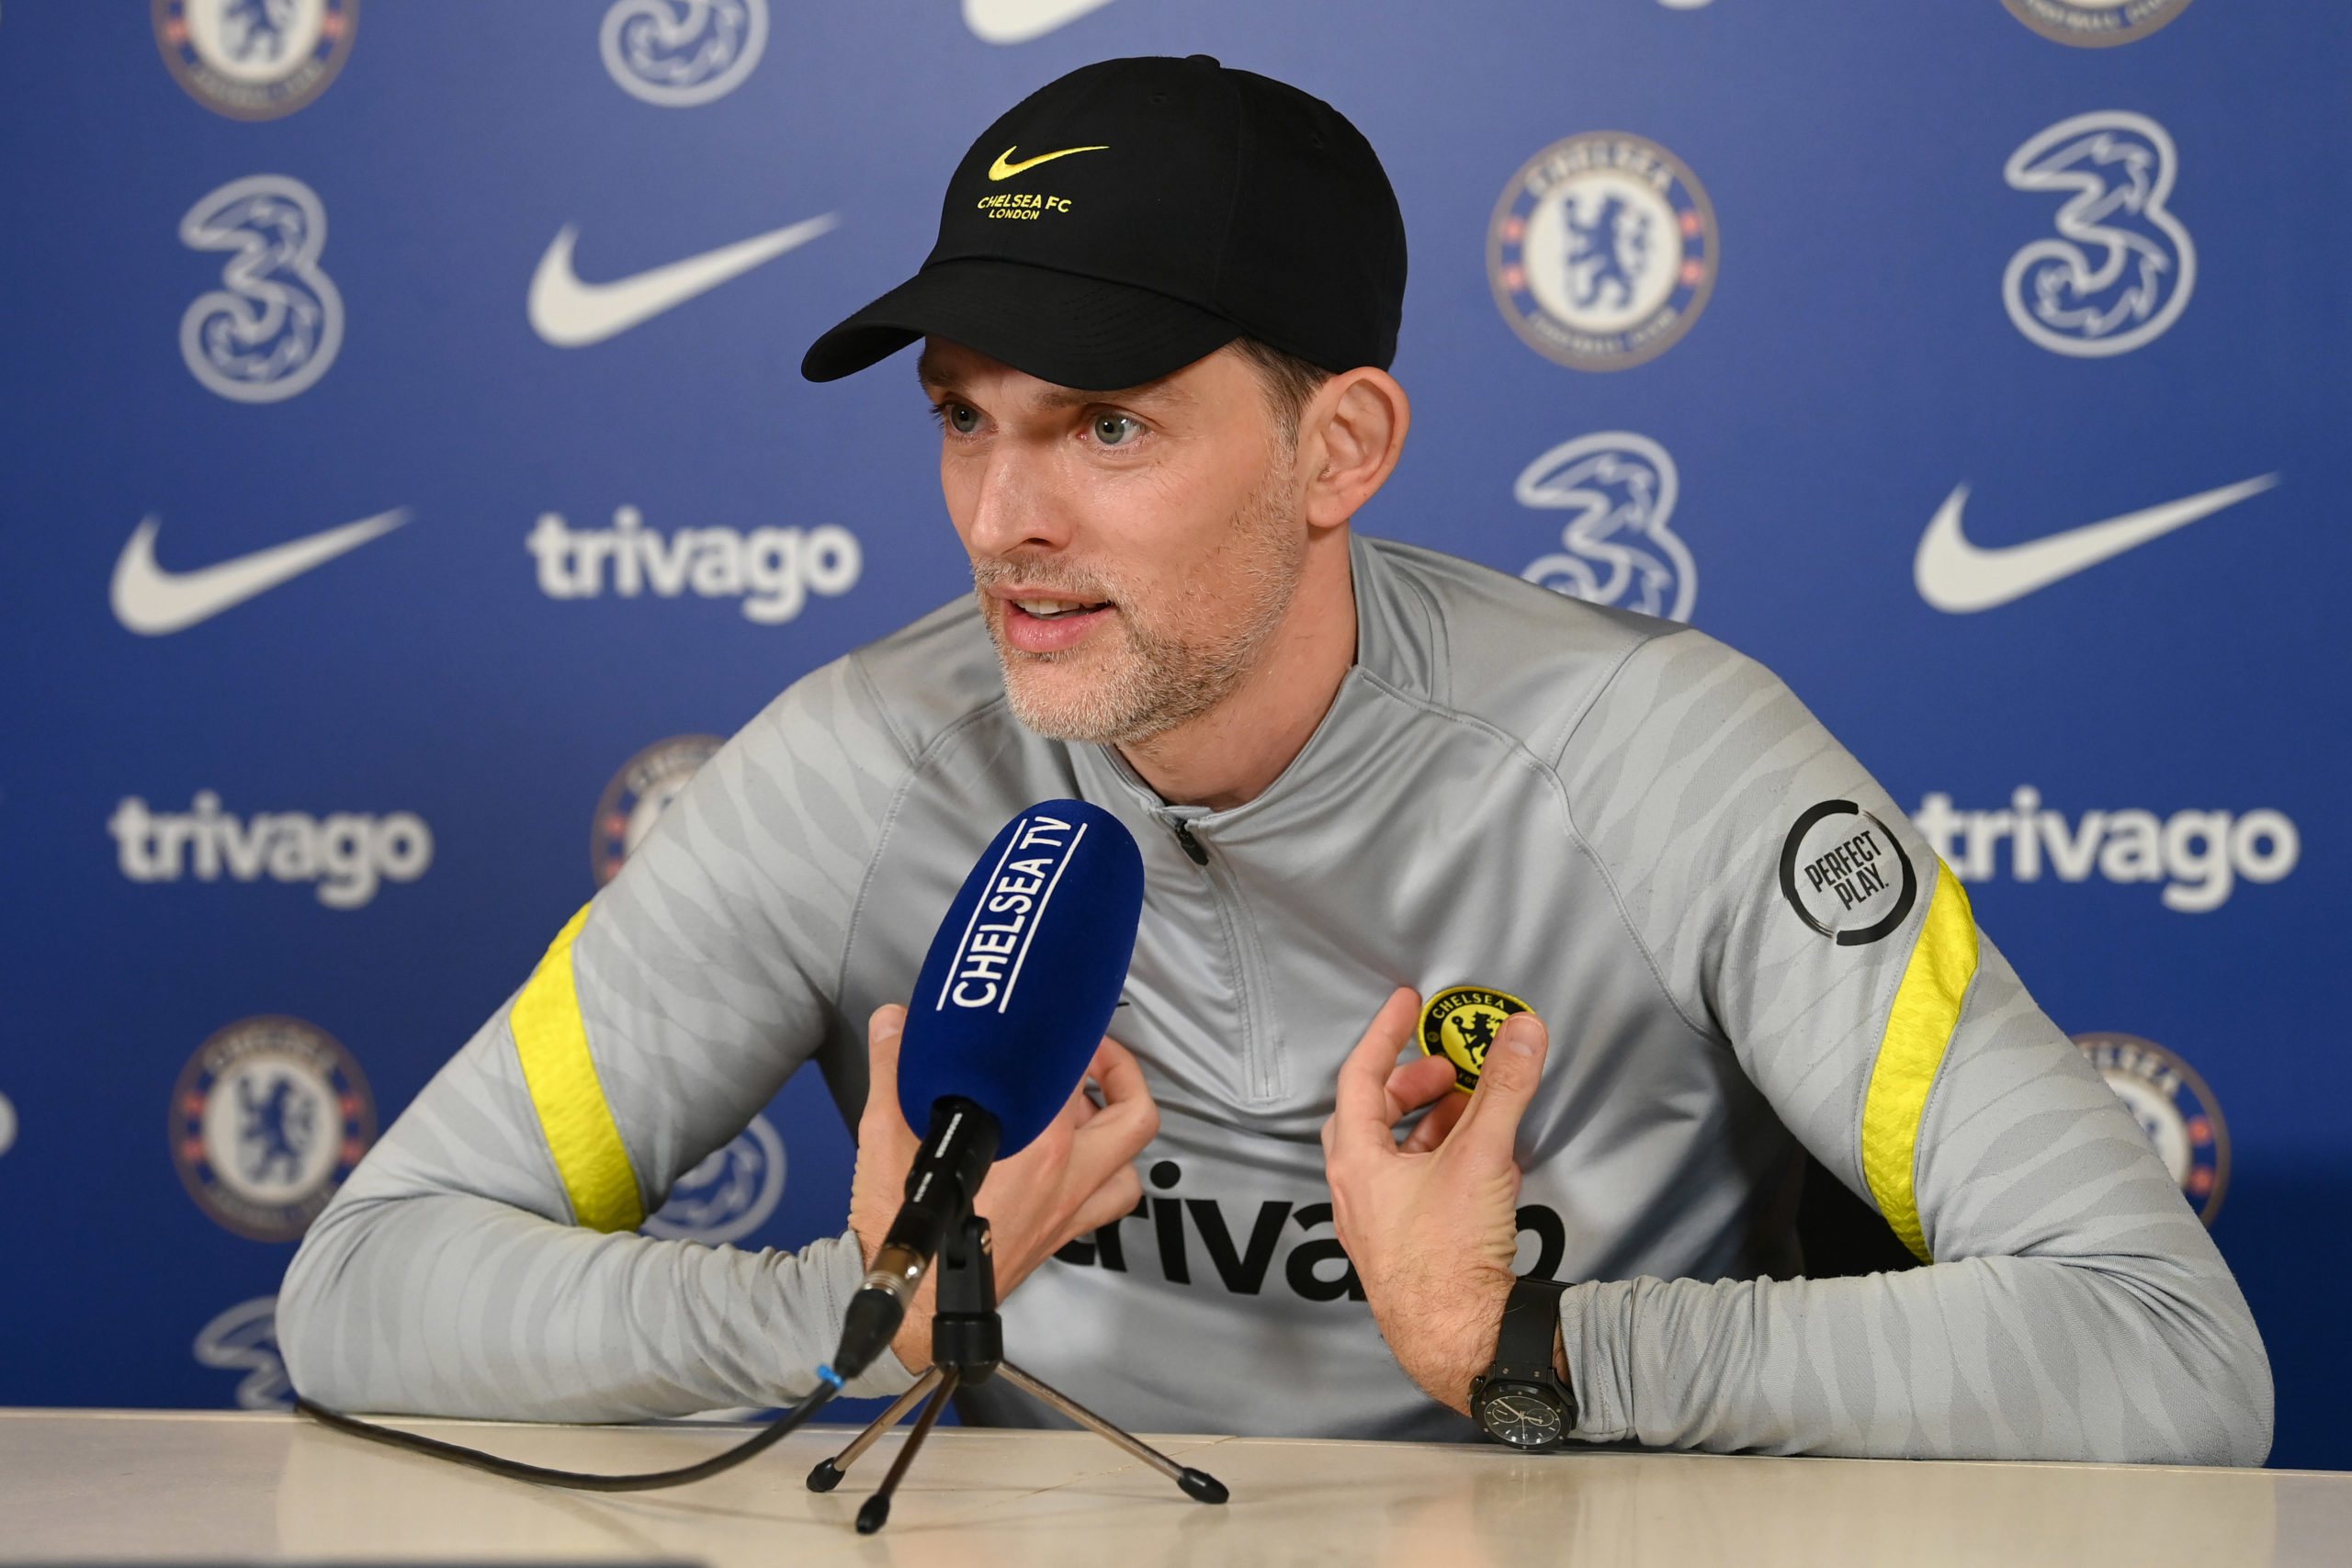 Tuchel should consider trialing something for the first time as Chelsea boss vs Spurs - TCC View